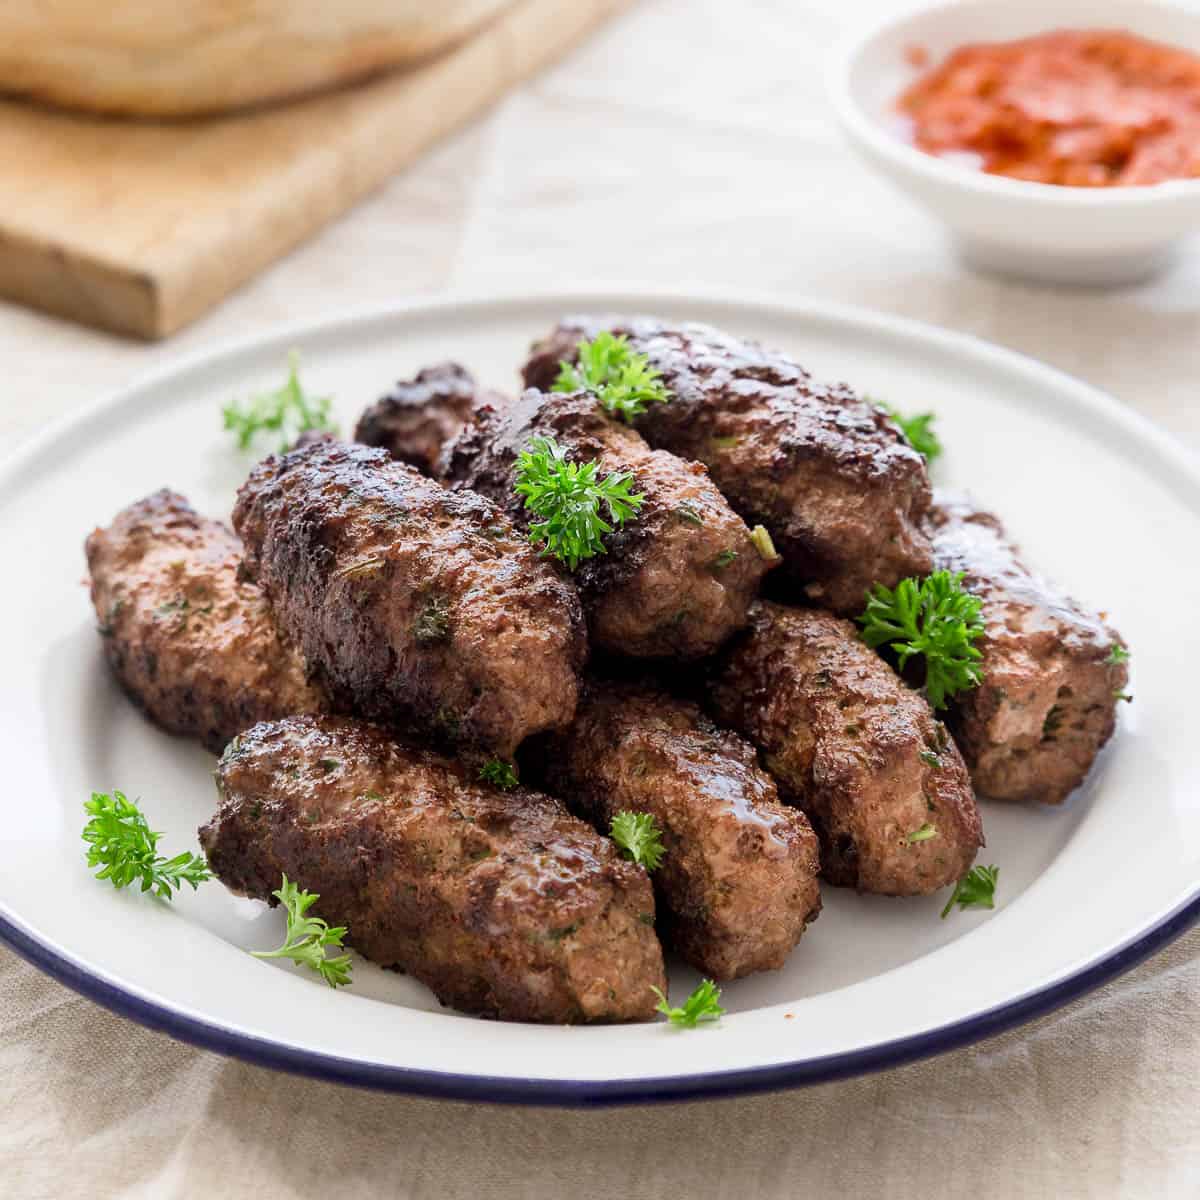 Plate of cevapi beef sausages.